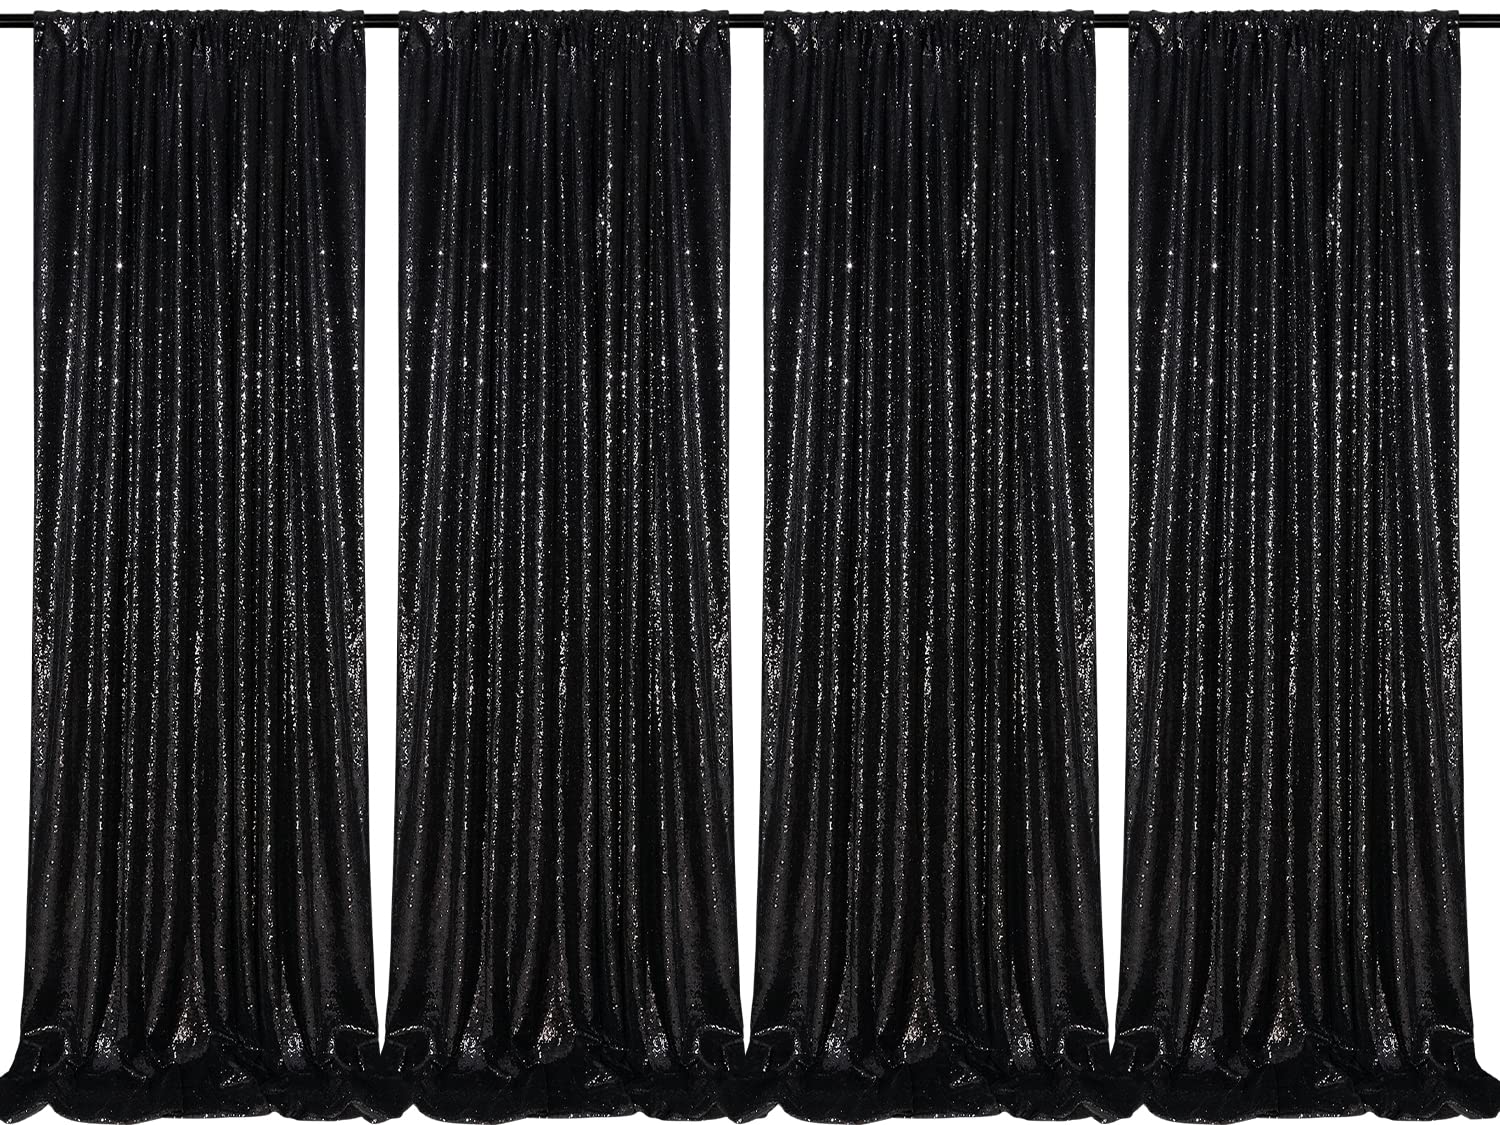 Black Sequin Backdrop 4 Panels 2FTx8FT Halloween Backdrop Curtains Party Backdrop Wedding Baby Shower Decoration